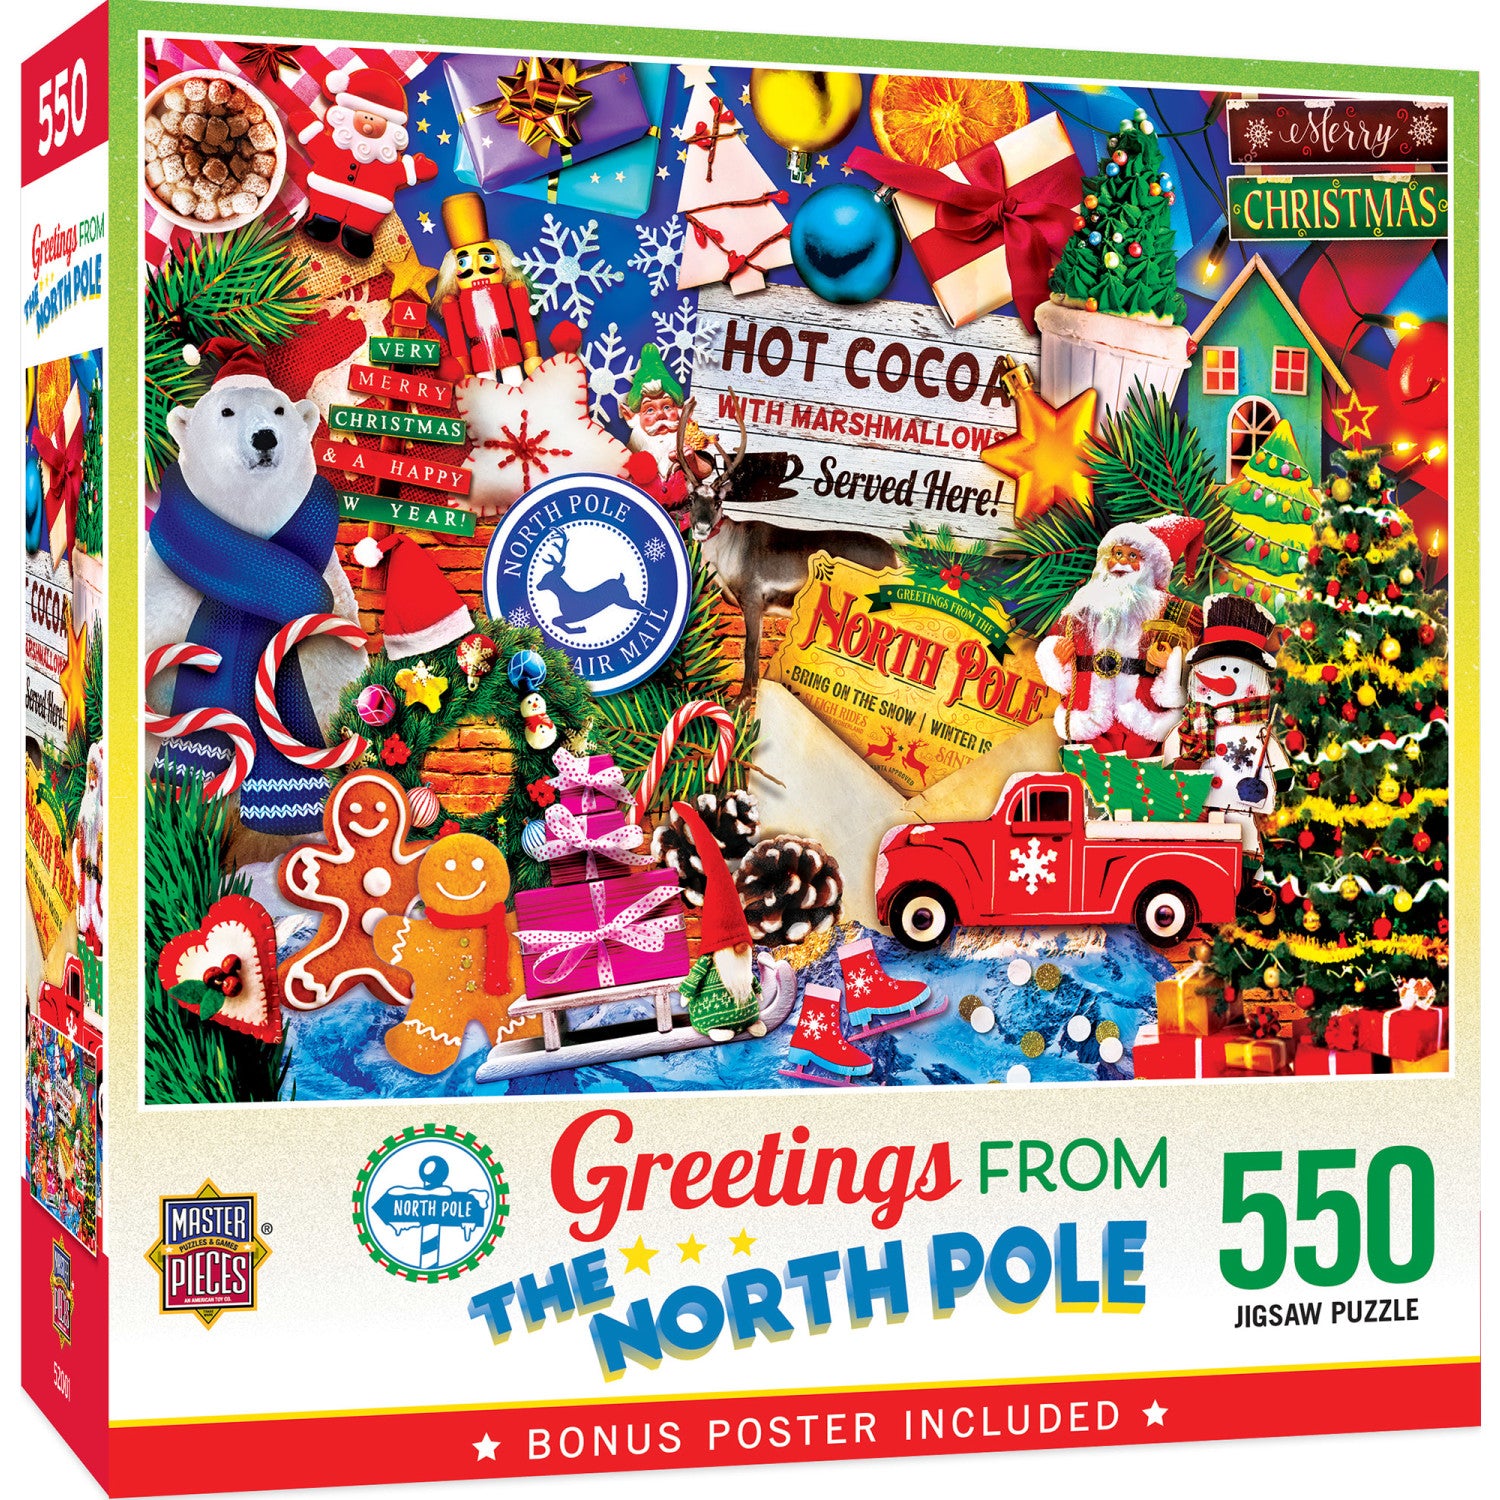 Greetings From The North Pole - 550 Piece Puzzle